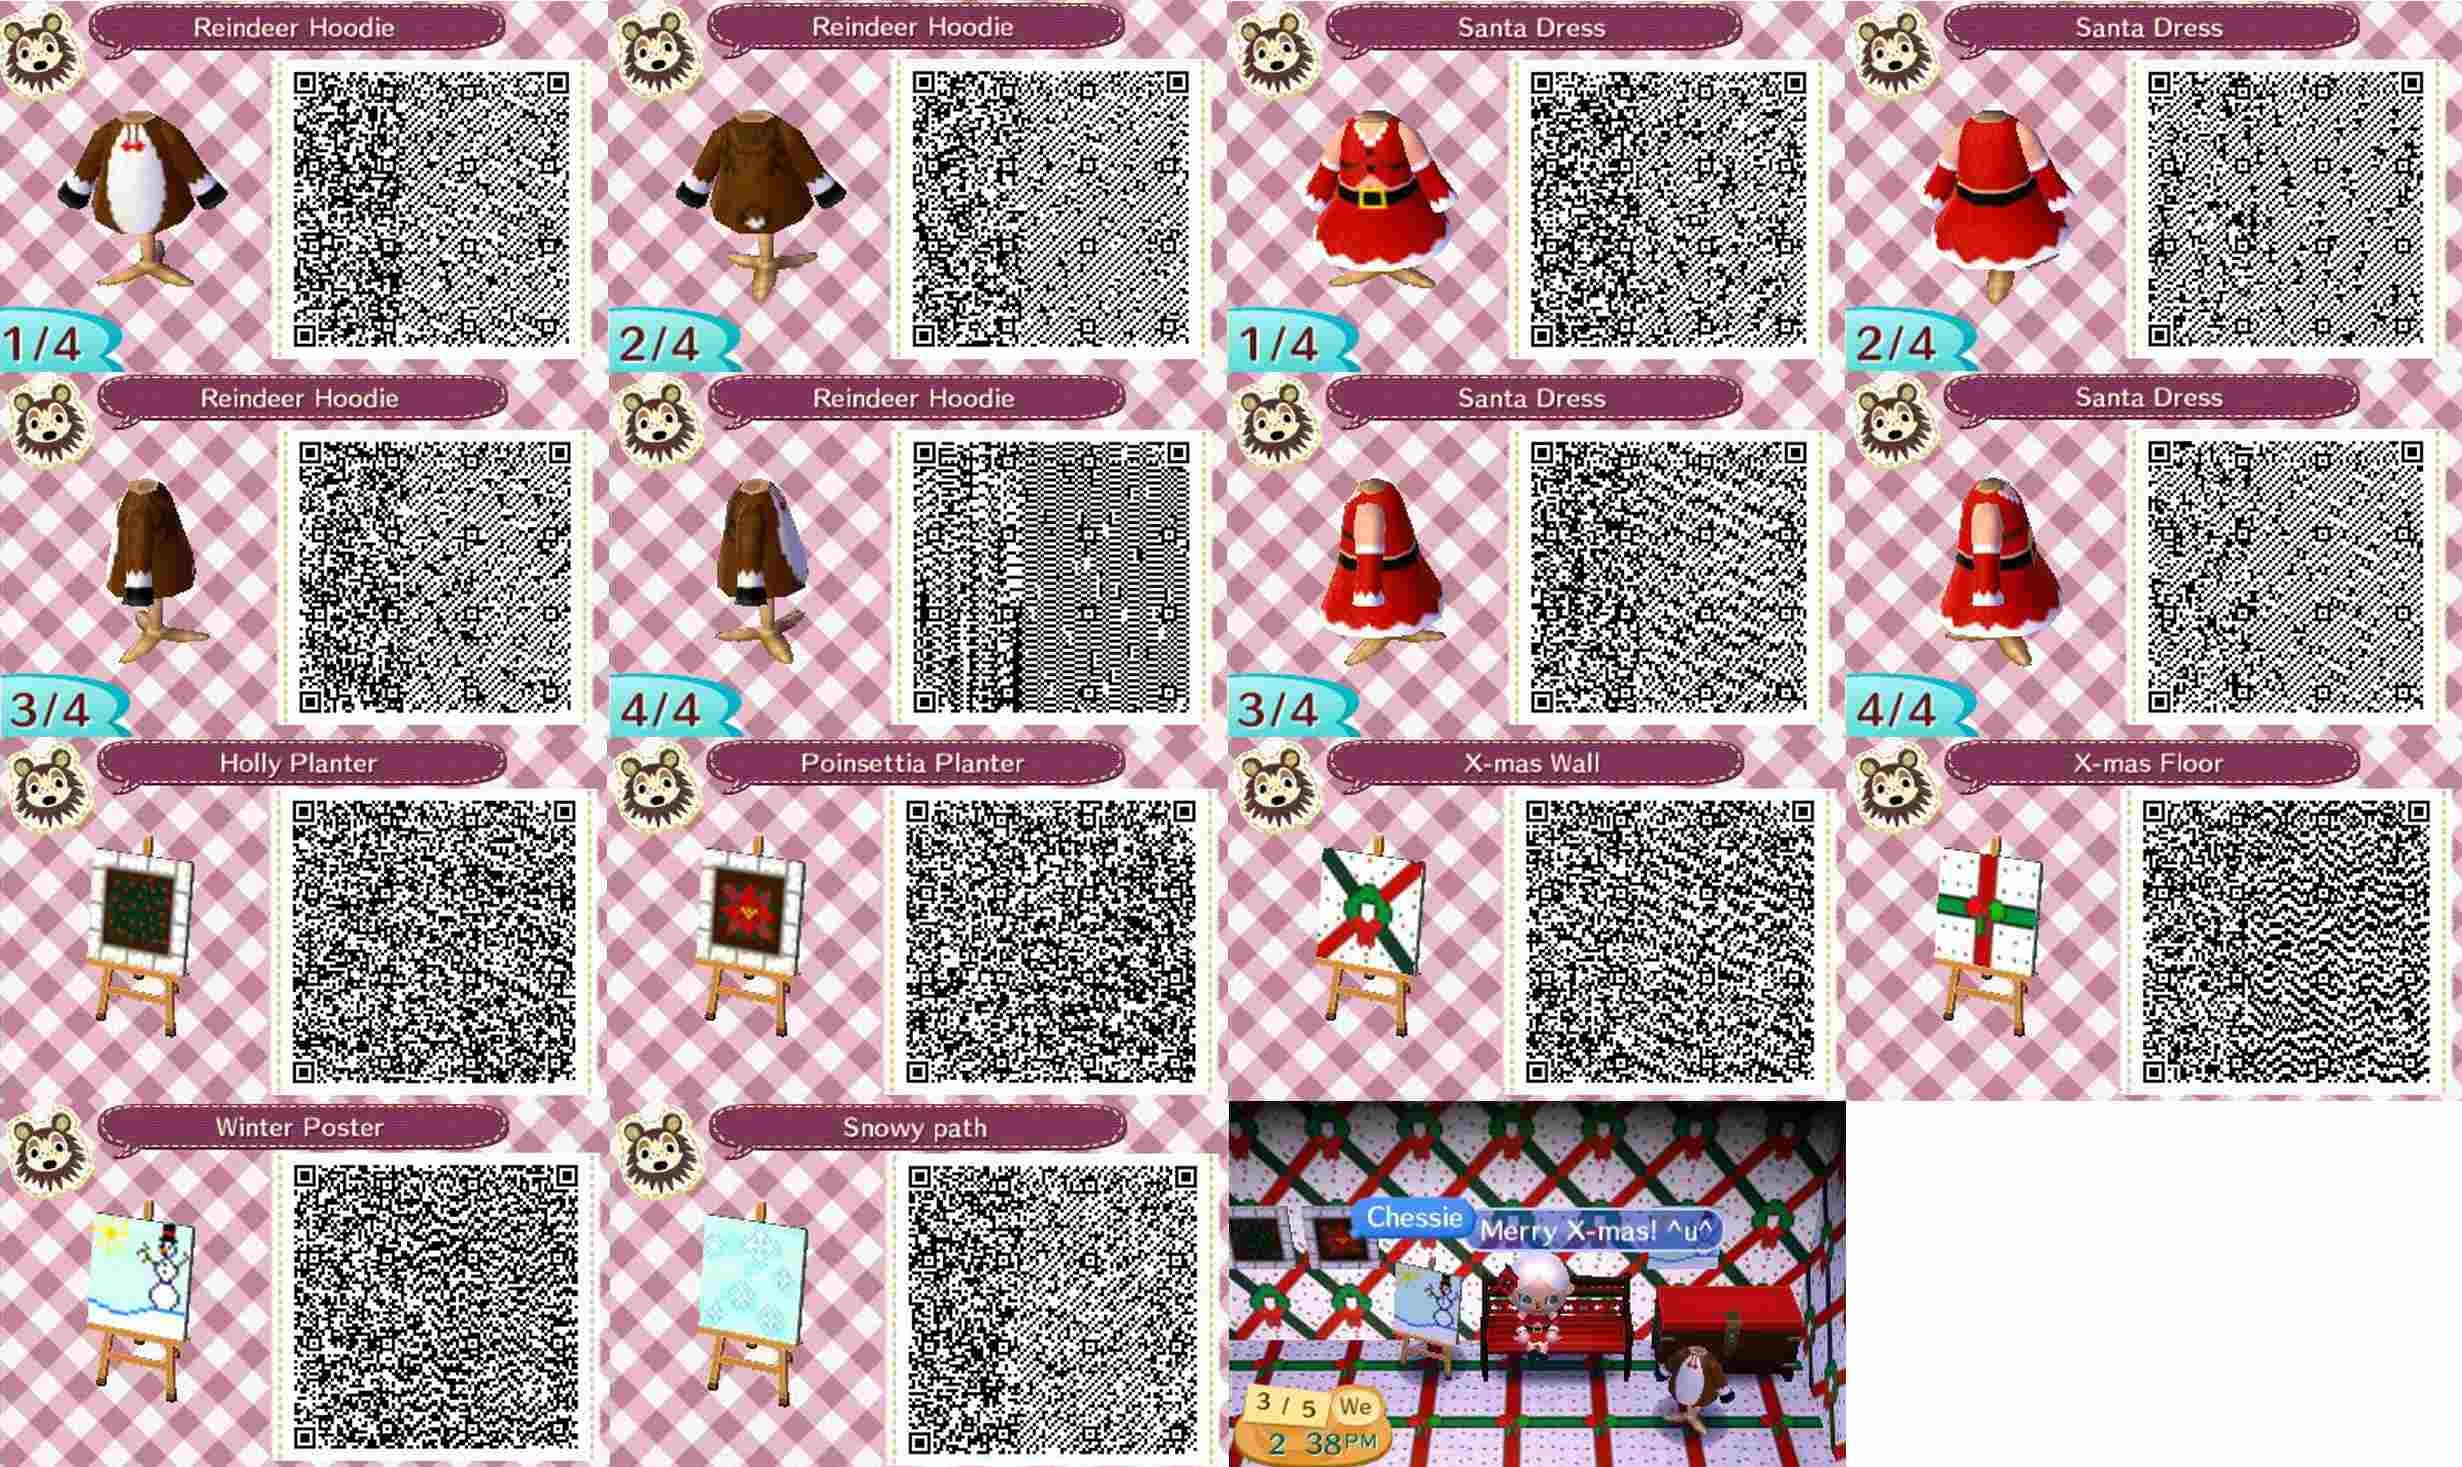 2462x1467 Acnl wallpaper images acnl room designs acnl bedroom furniture hair braids  codes acnl jpg  Acnl